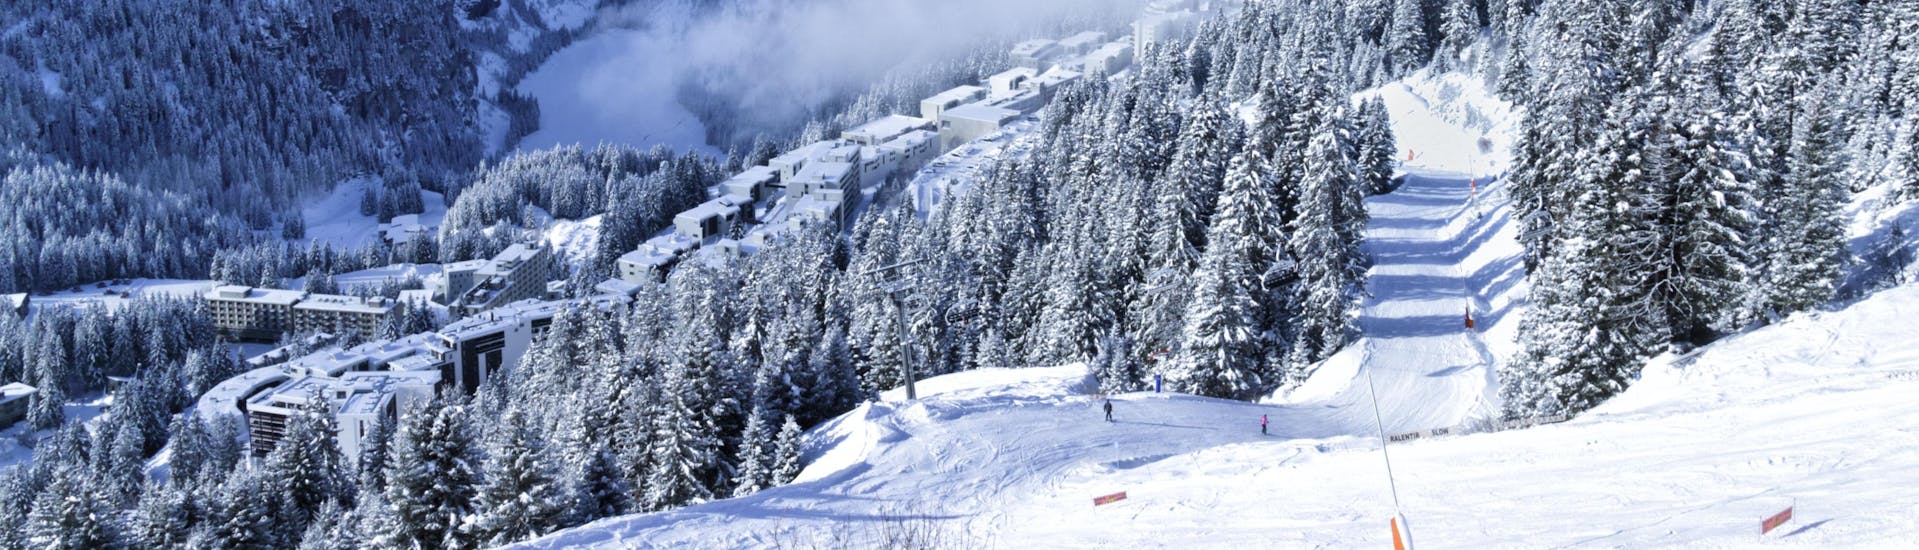 An image of the white winter landscape encountered in the ski resort of Flaine, where local ski schools take their students for their ski lessons.